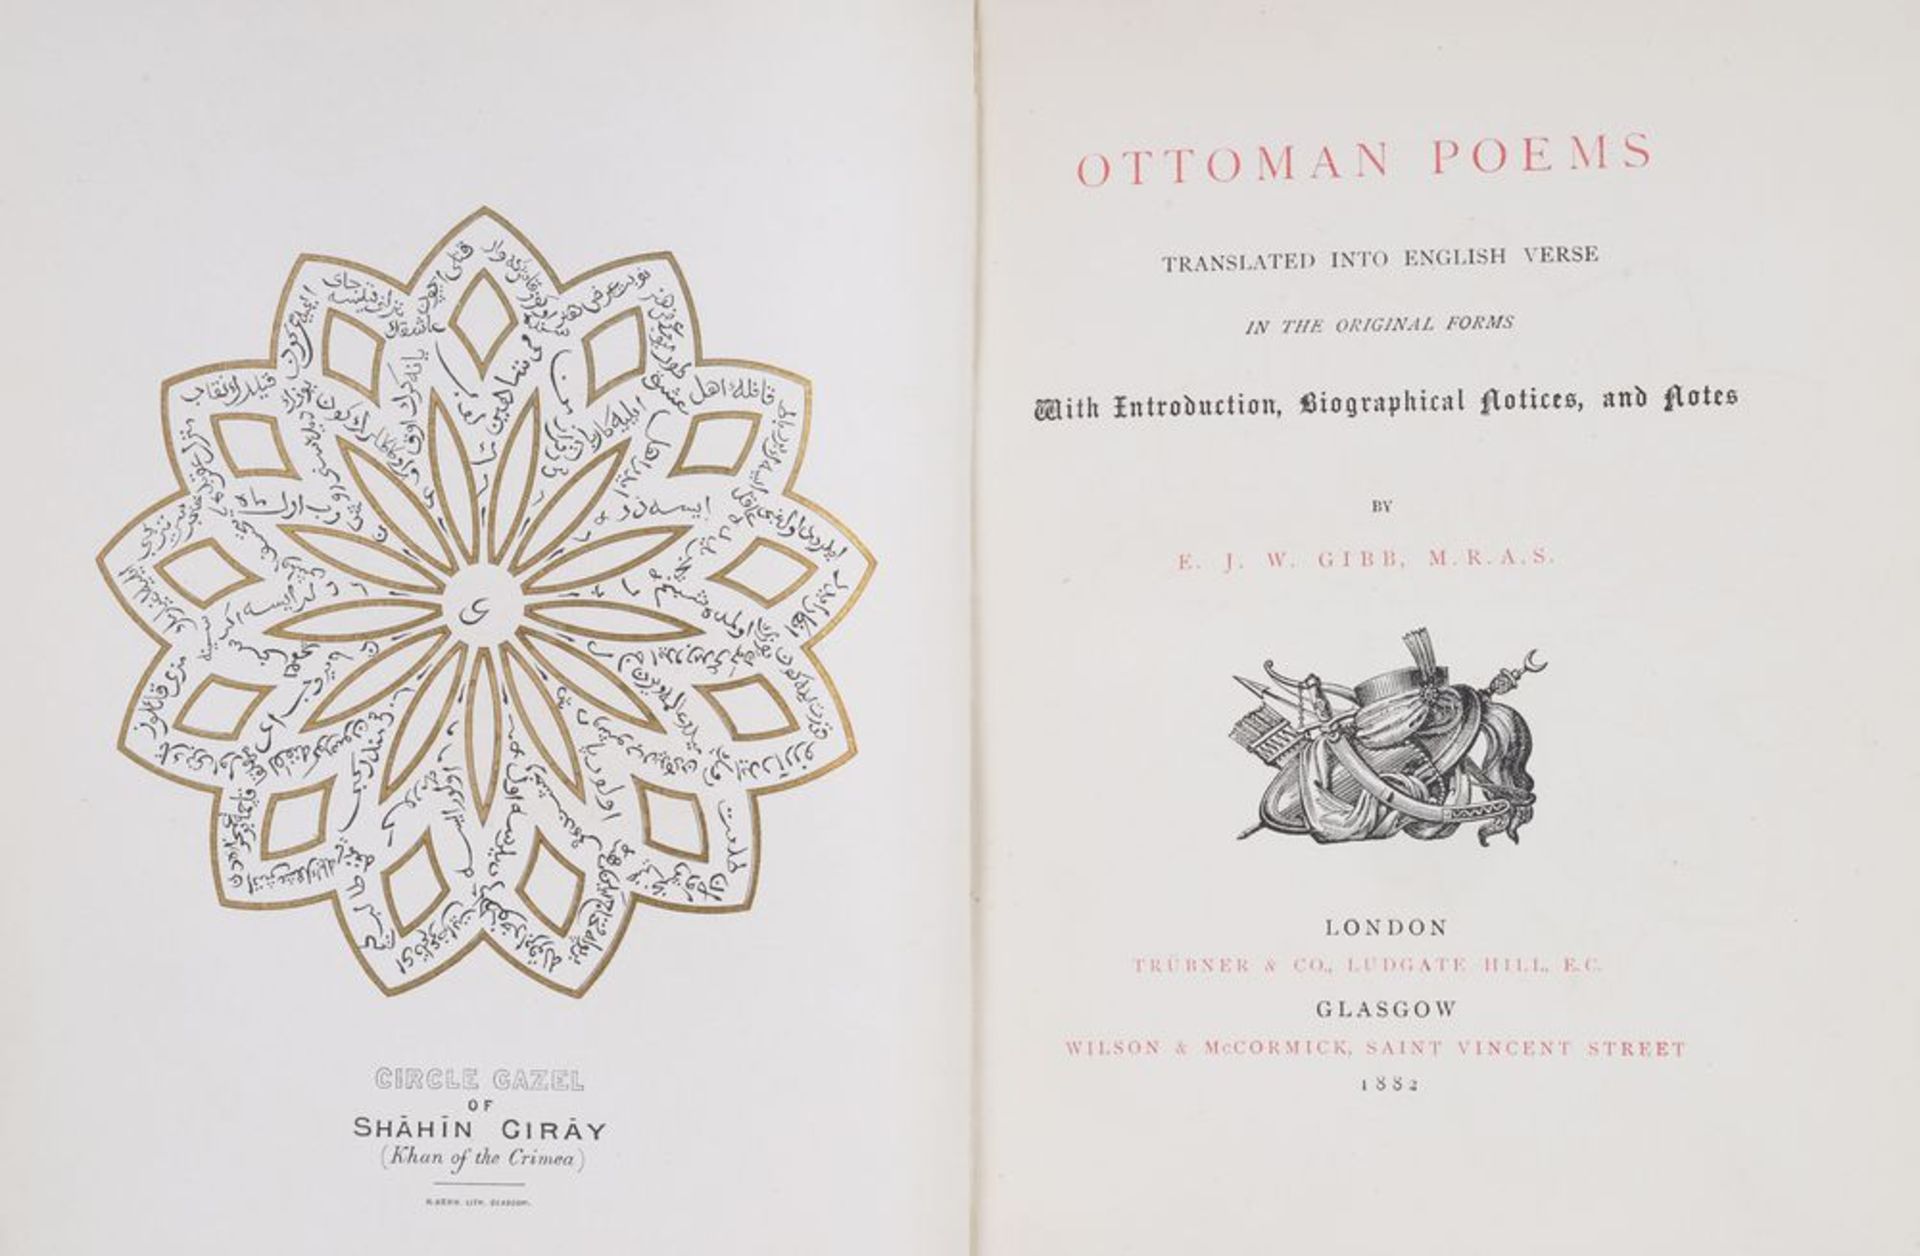 OTTOMAN POEMS - Ottoman poems, translated into English verse in the original forms, [...] - Bild 2 aus 4